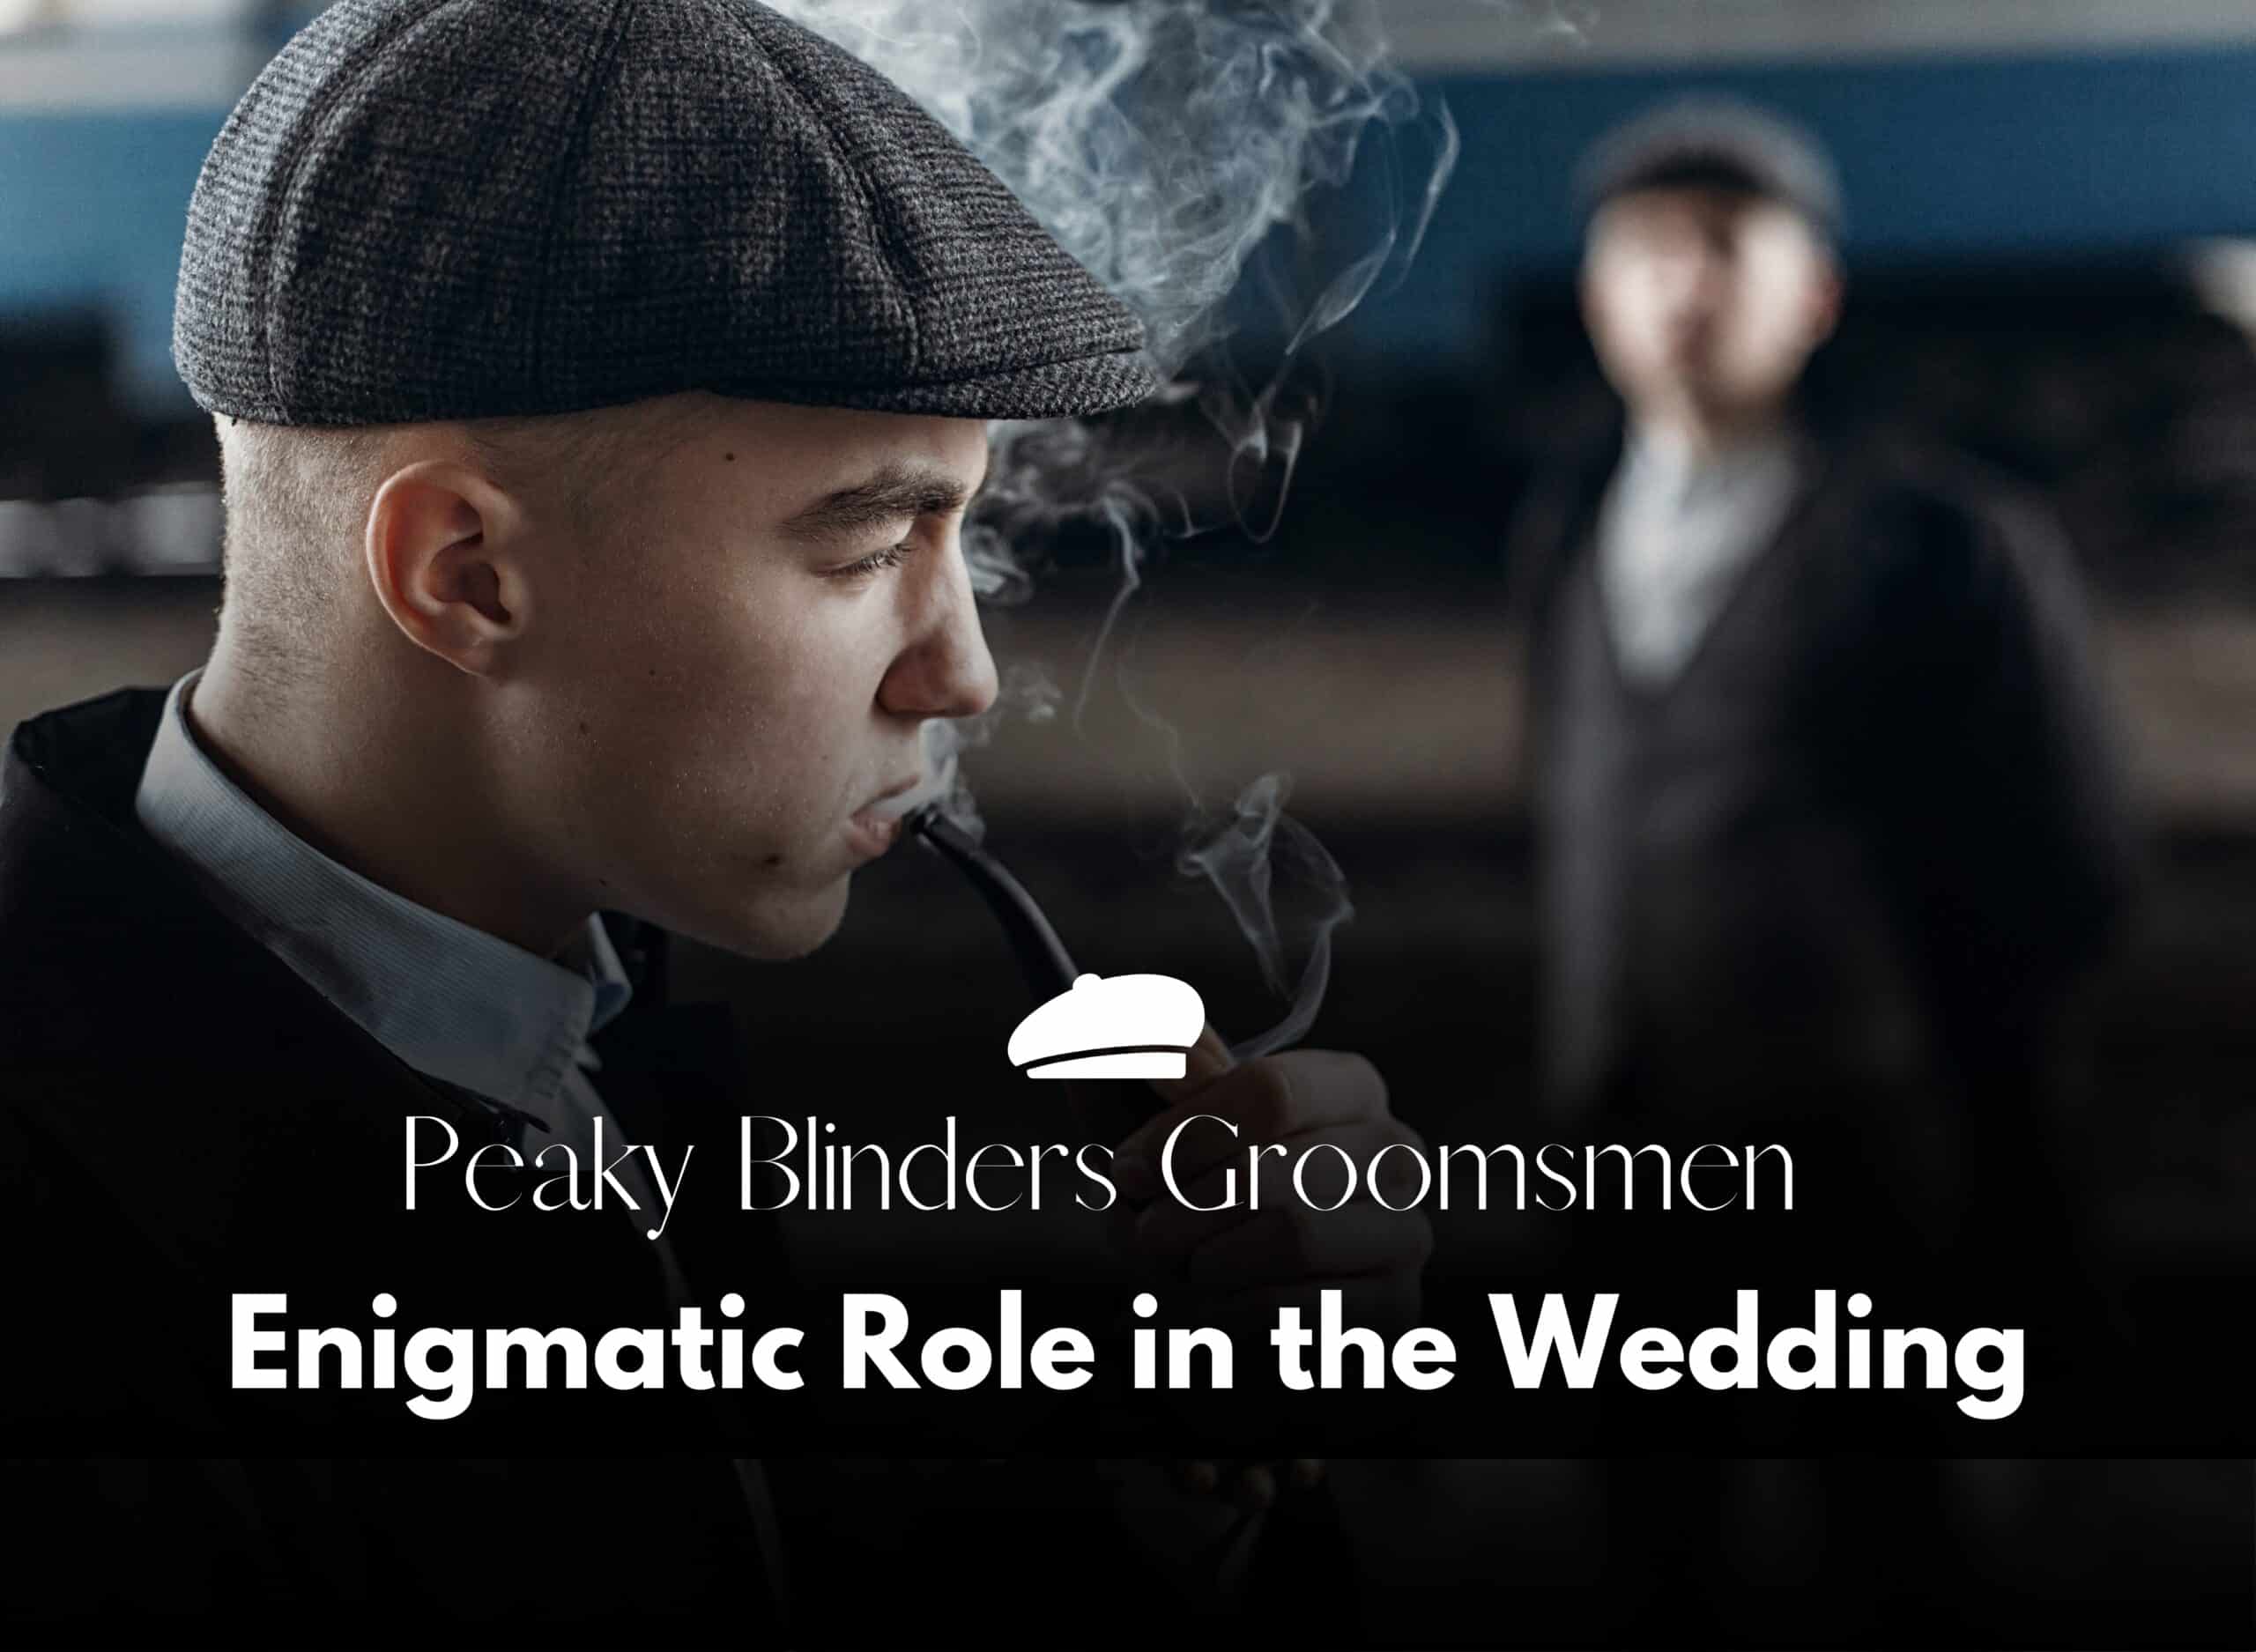 What Are Peaky Blinders Groomsmen And Their Enigmatic Role In The Wedding Celebration?